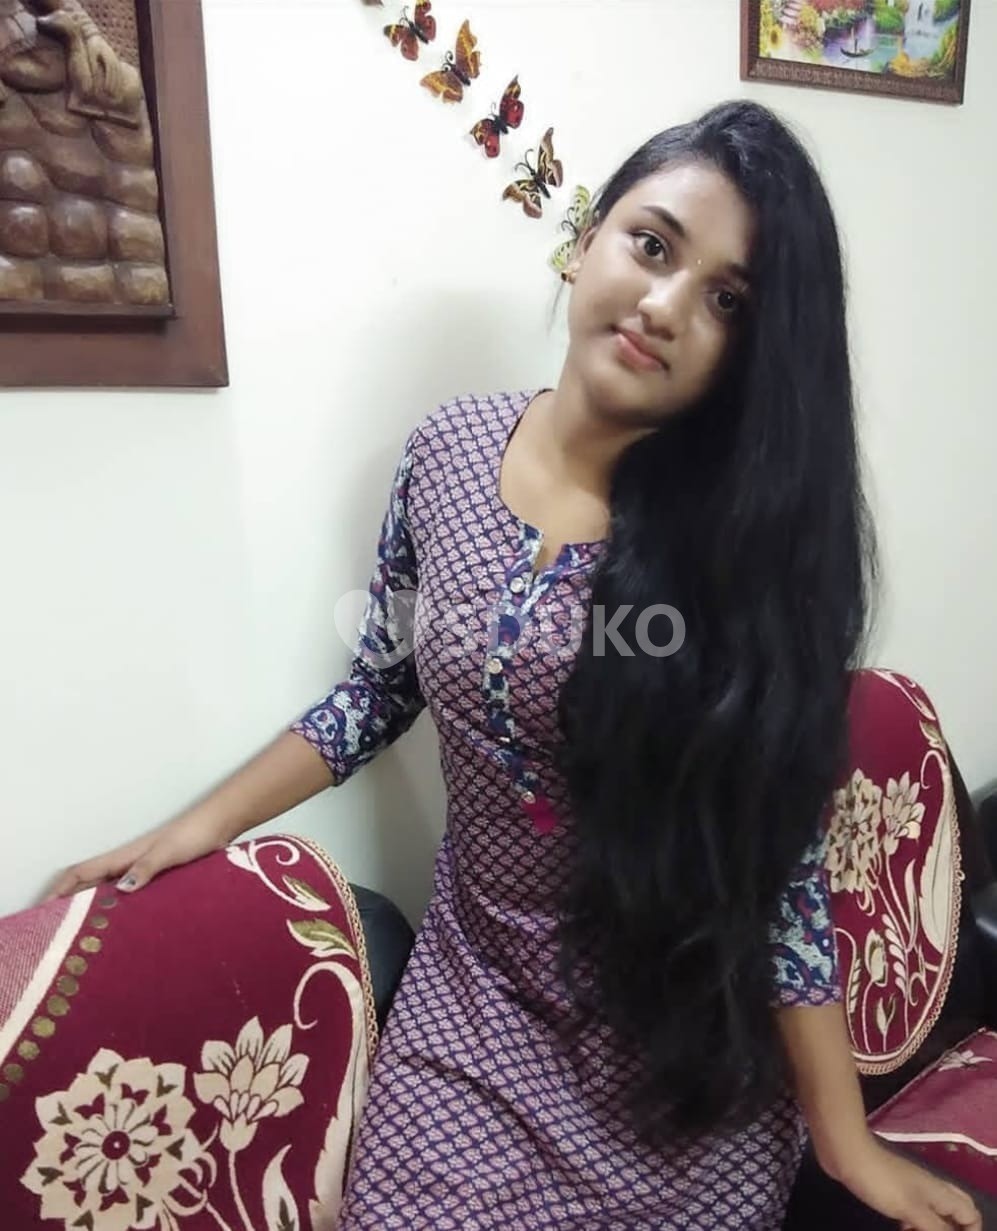 MANIKONDA💯 % FULLY SATISFACTION AND DOORSTEP INCALL OUTCALL SERVICE AVAILABLE SAFE AND SECURE..